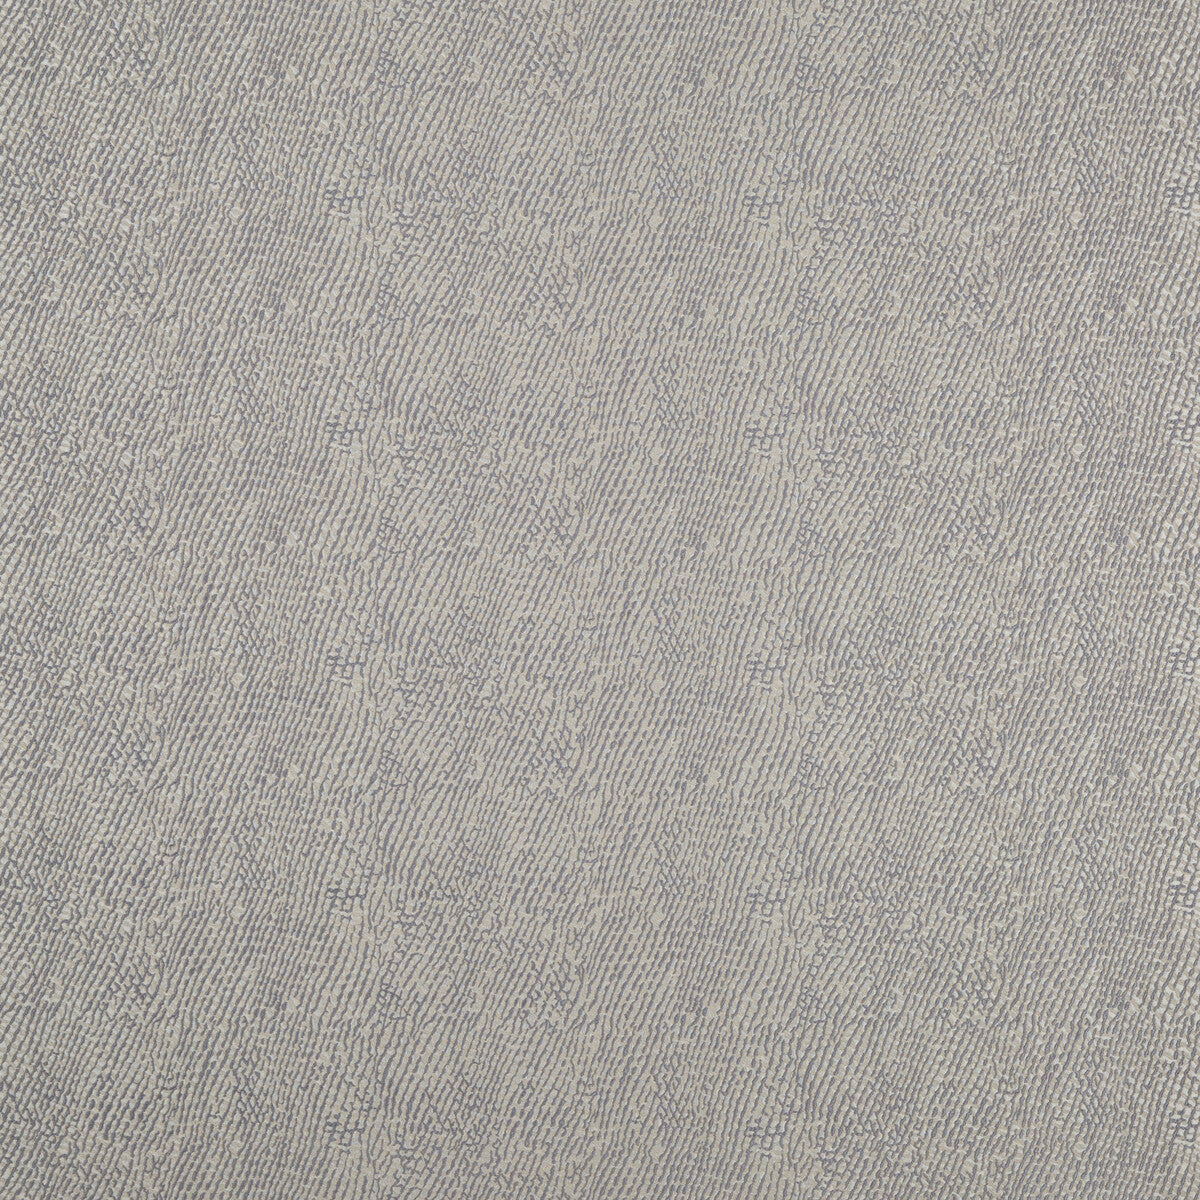 Galaxy fabric in platinum/slate color - pattern ED85224.1.0 - by Threads in the Odyssey collection